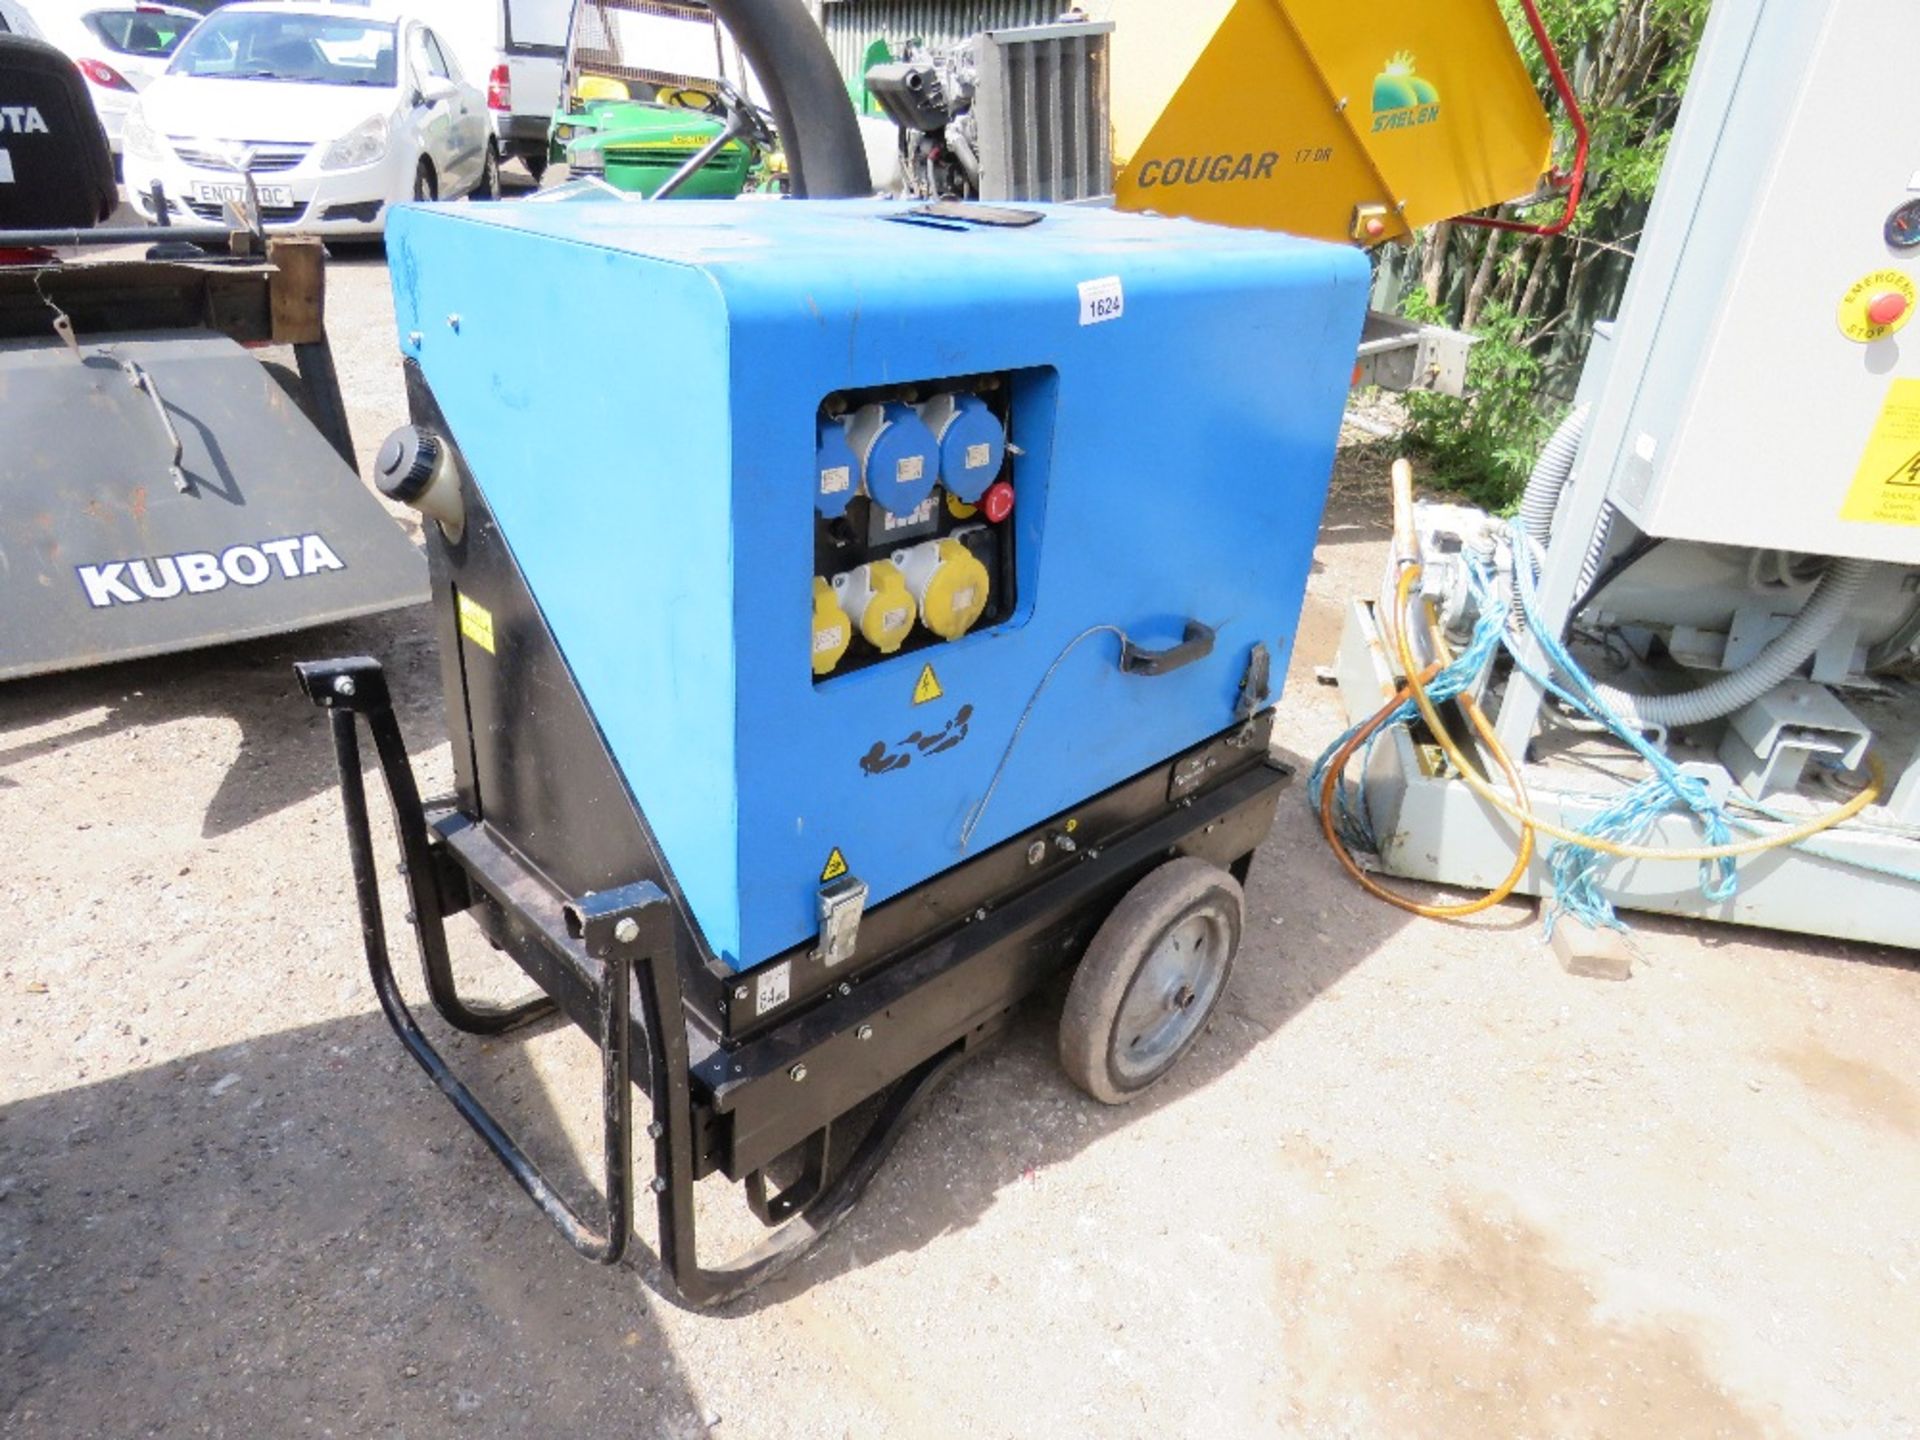 PRAMAC 6KVA DIESEL GENERATOR WHEN TESTED WAS SEEN TO RUN AND MAKE POWER